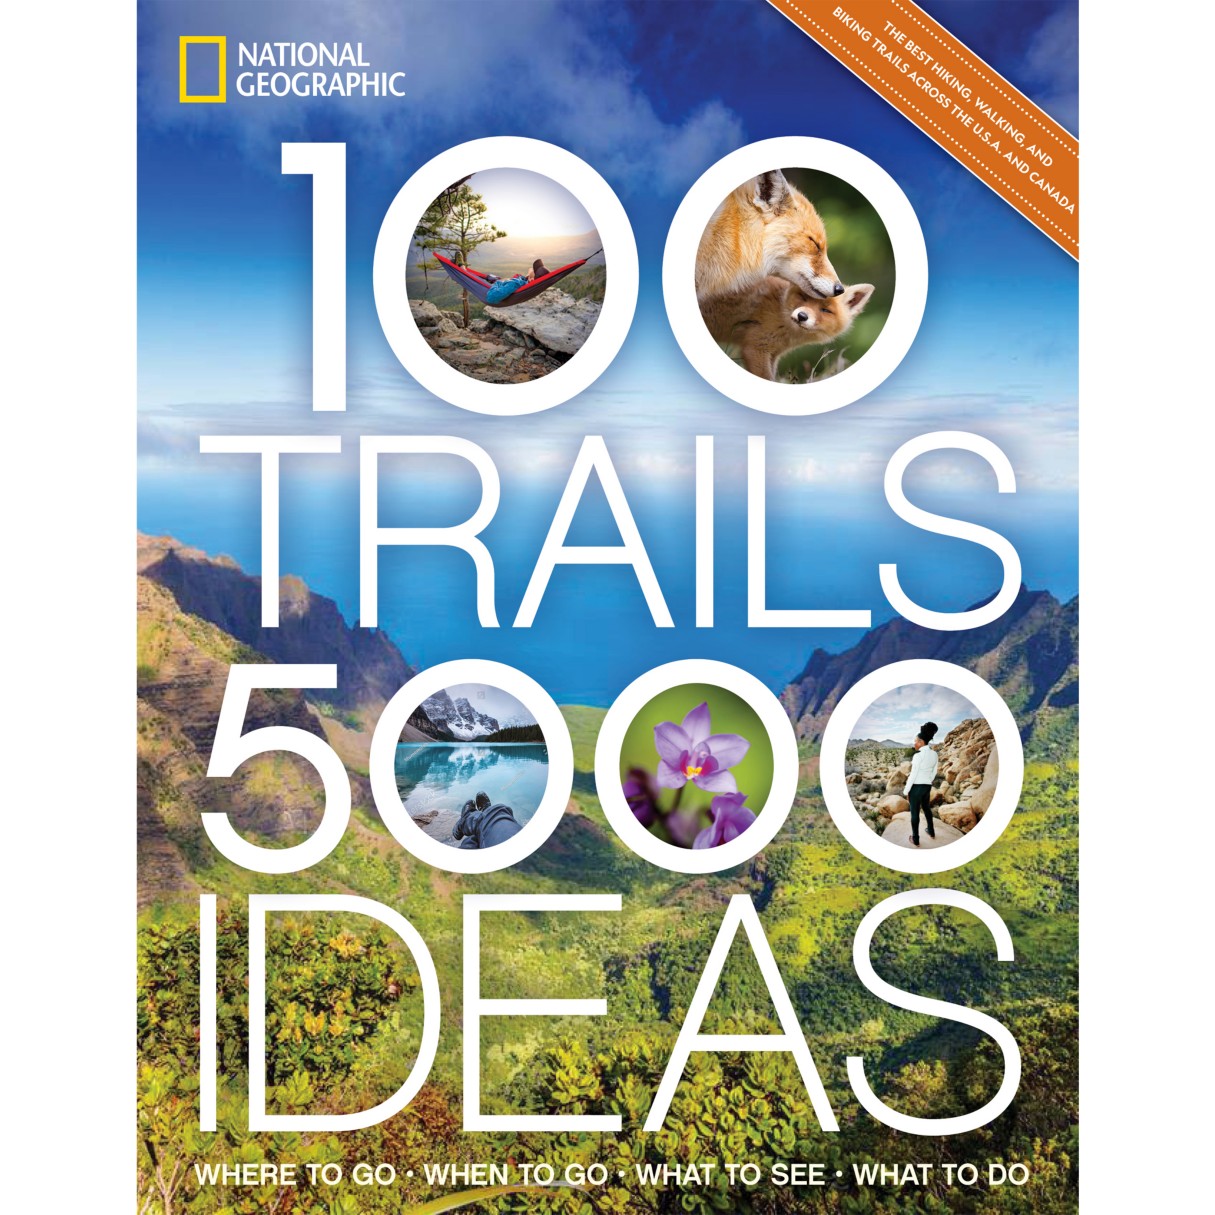 100 Trails, 5000 Ideas: Where to Go, When to Go, What to See, What to Do Book – National Geographic